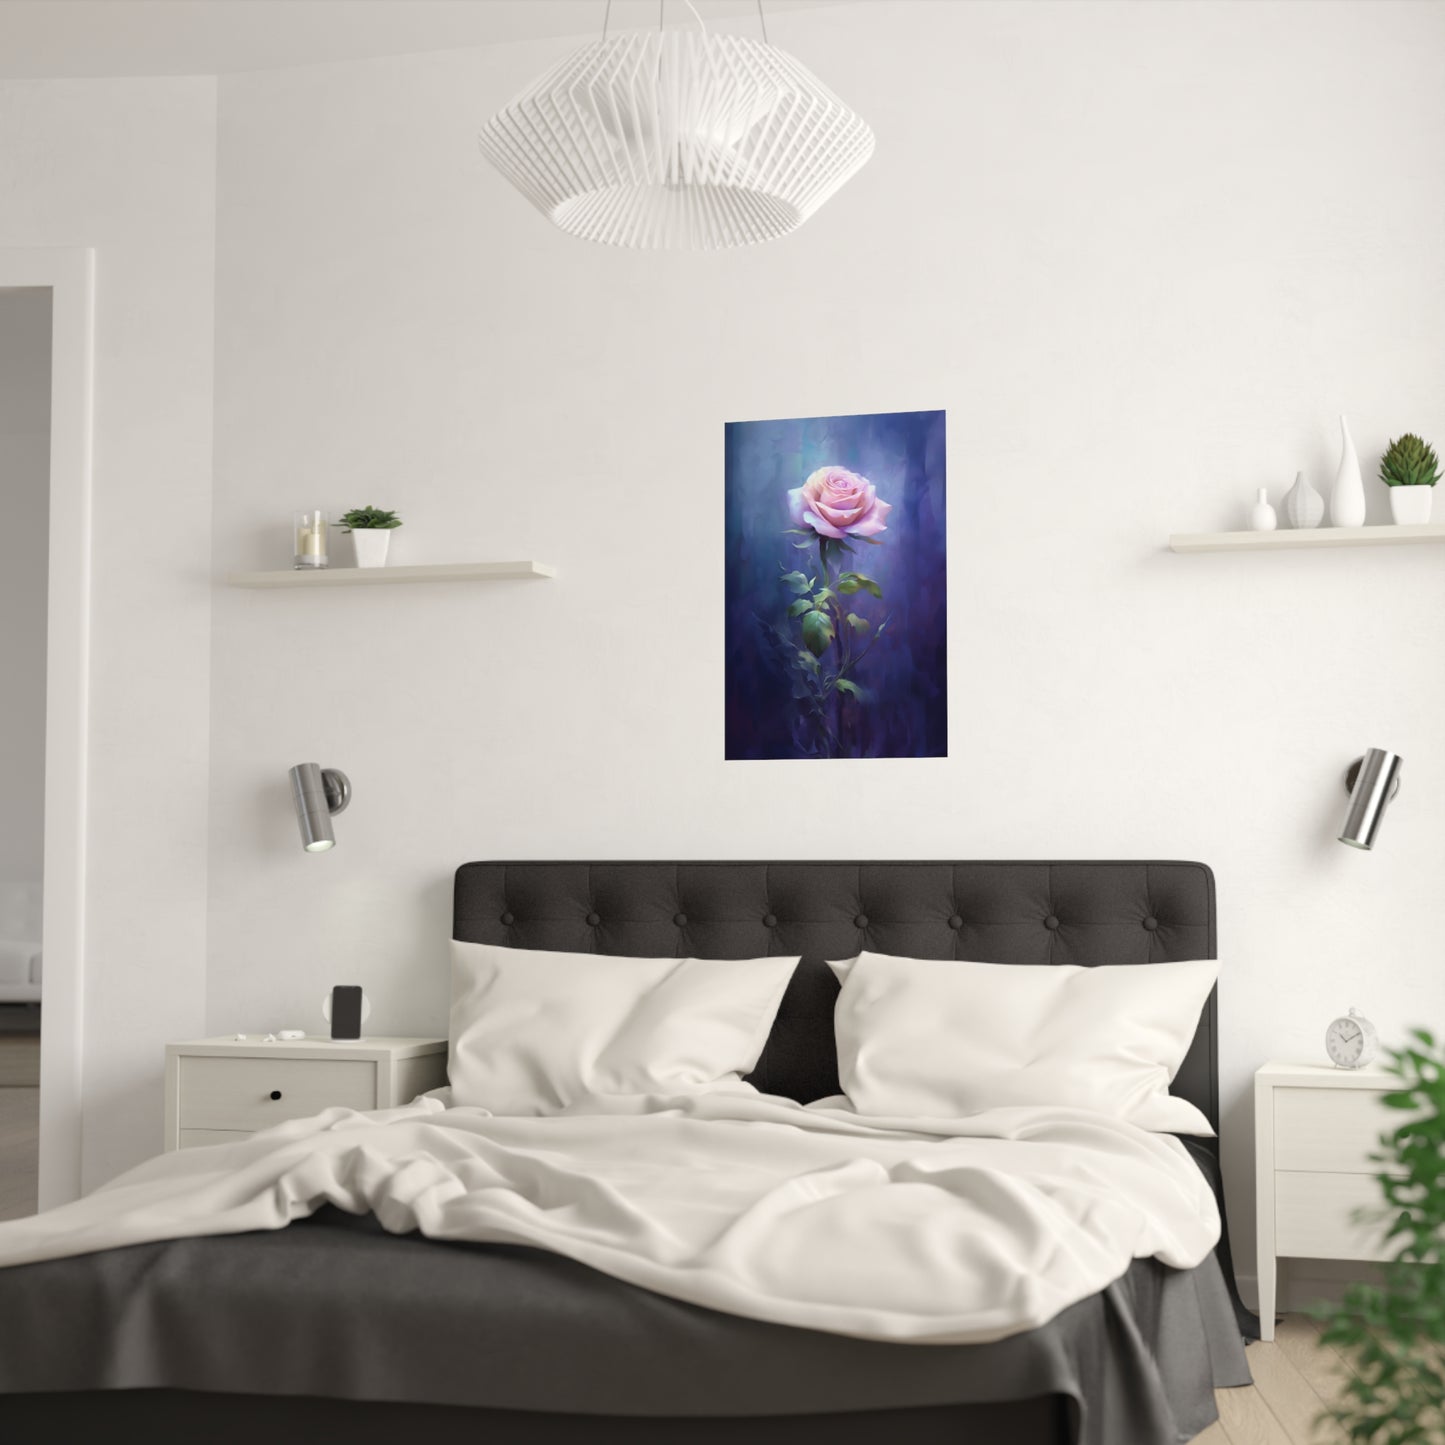 Introducing Our Exquisite Purple Rose Wall Decor – Digital Art Style! - Satin Poster